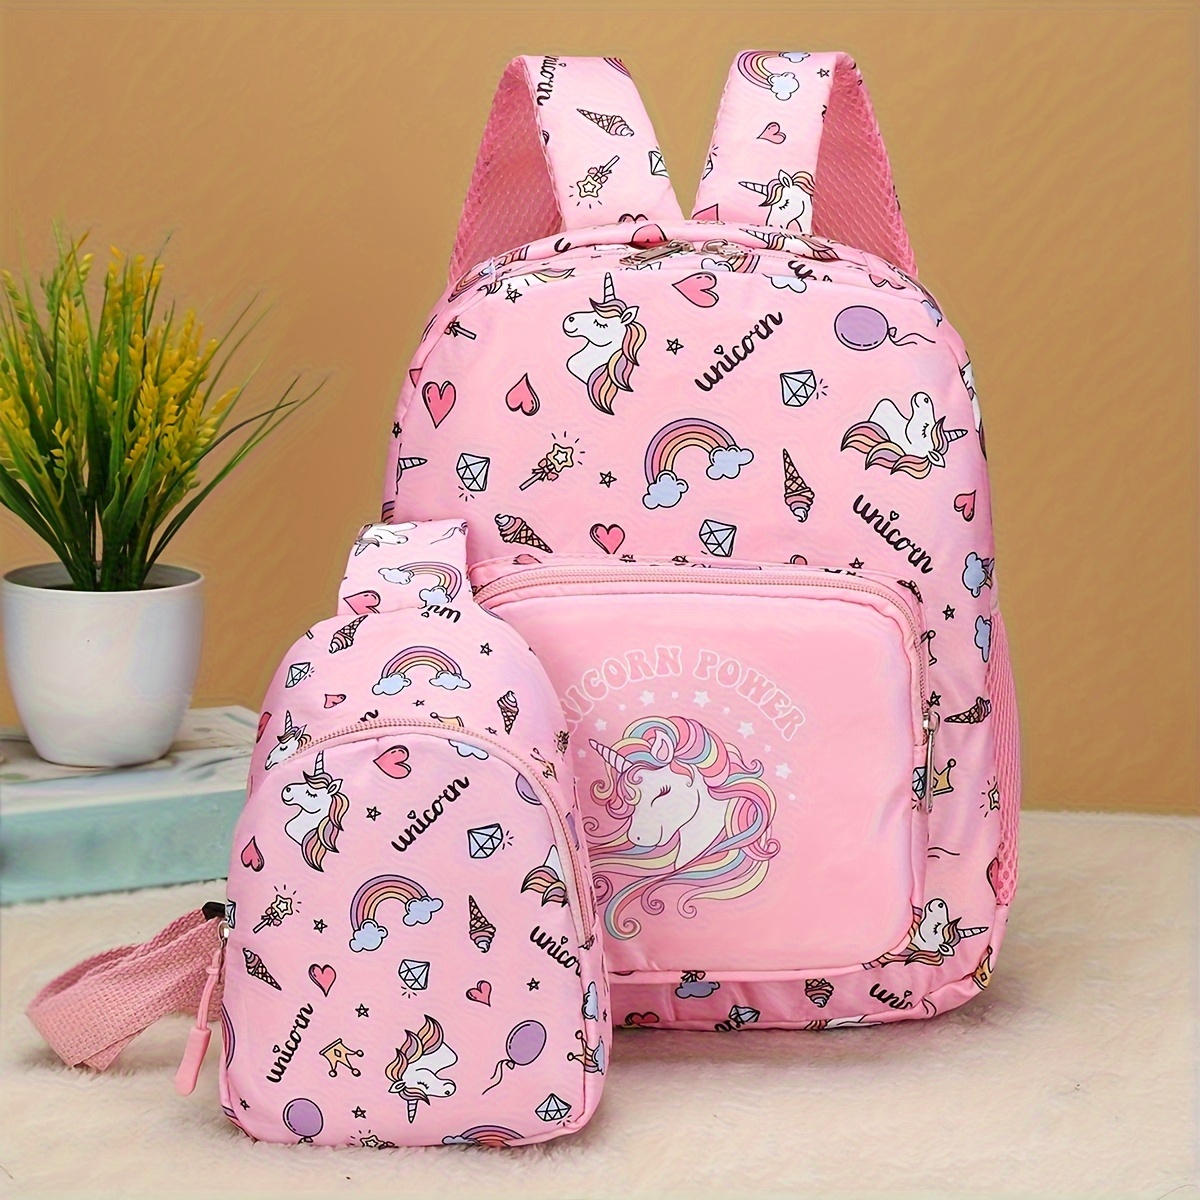 Fashion Sky Star Design Unicorn Backpack Coloful 3D Printing 4 Pcs Set  Childrens Backpack Schoolbag for boy and girl - AliExpress